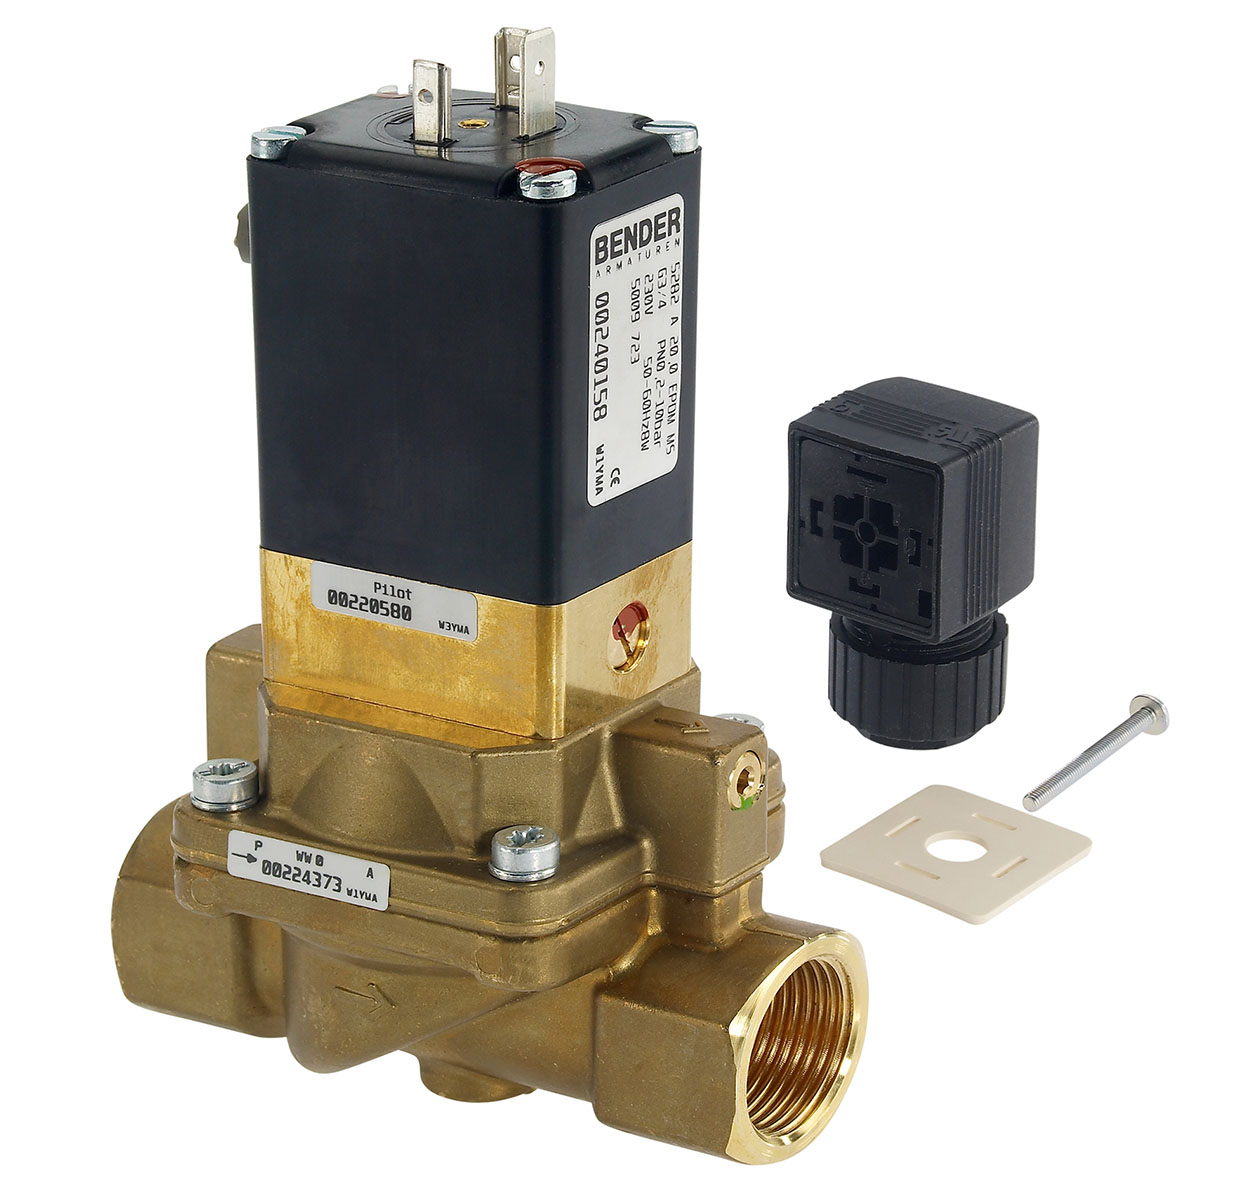 5009705 - 2/2 way solenoid valve normally closed for lightly soiled fluids Type 7; female thread